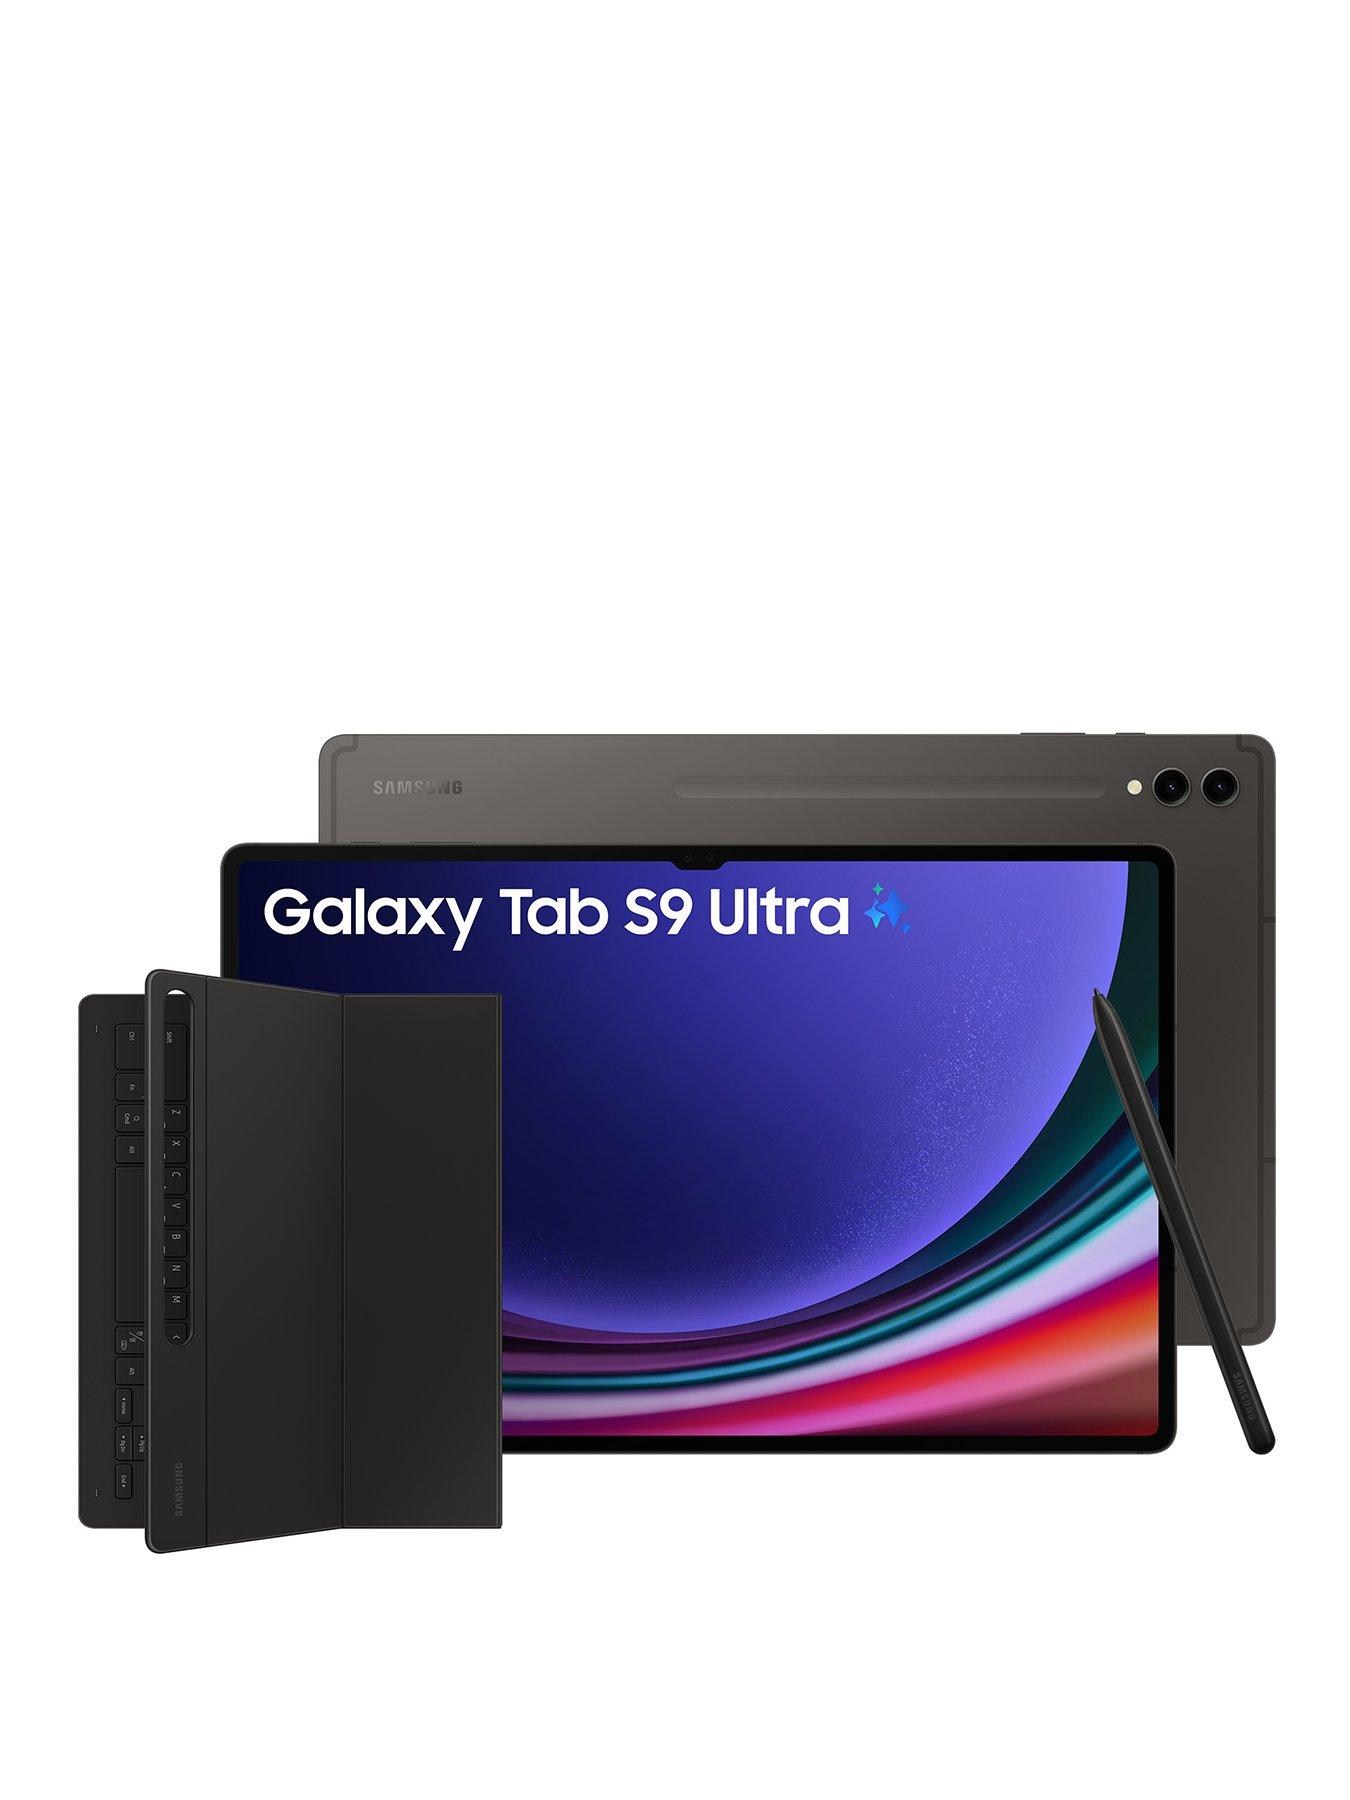 Galaxy Tab S9 Ultra (Wi-Fi) Graphite 512GB - Specs & Features